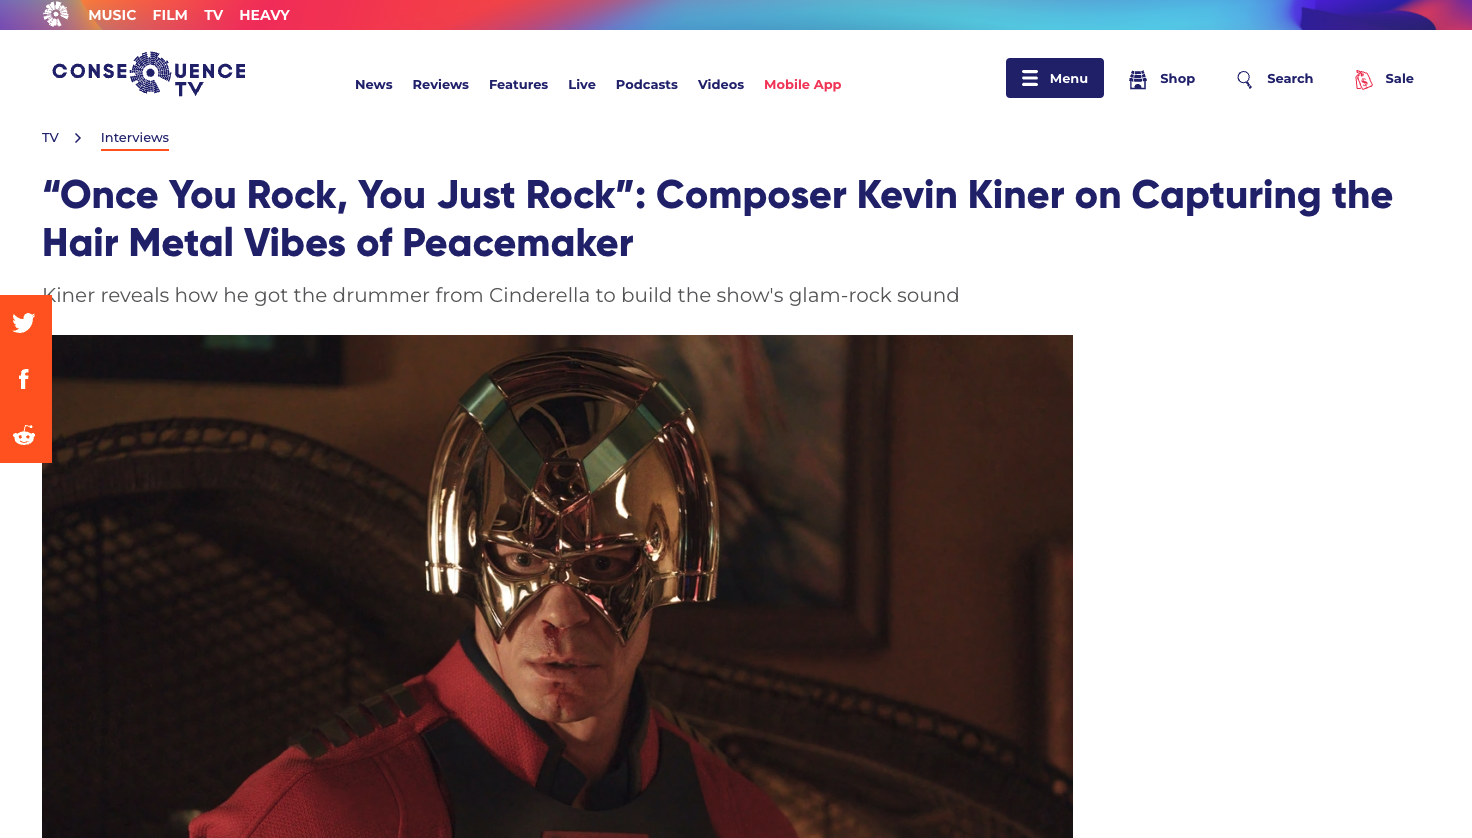 Interview (Part 1) - Composer Kevin Kiner Discusses His Award